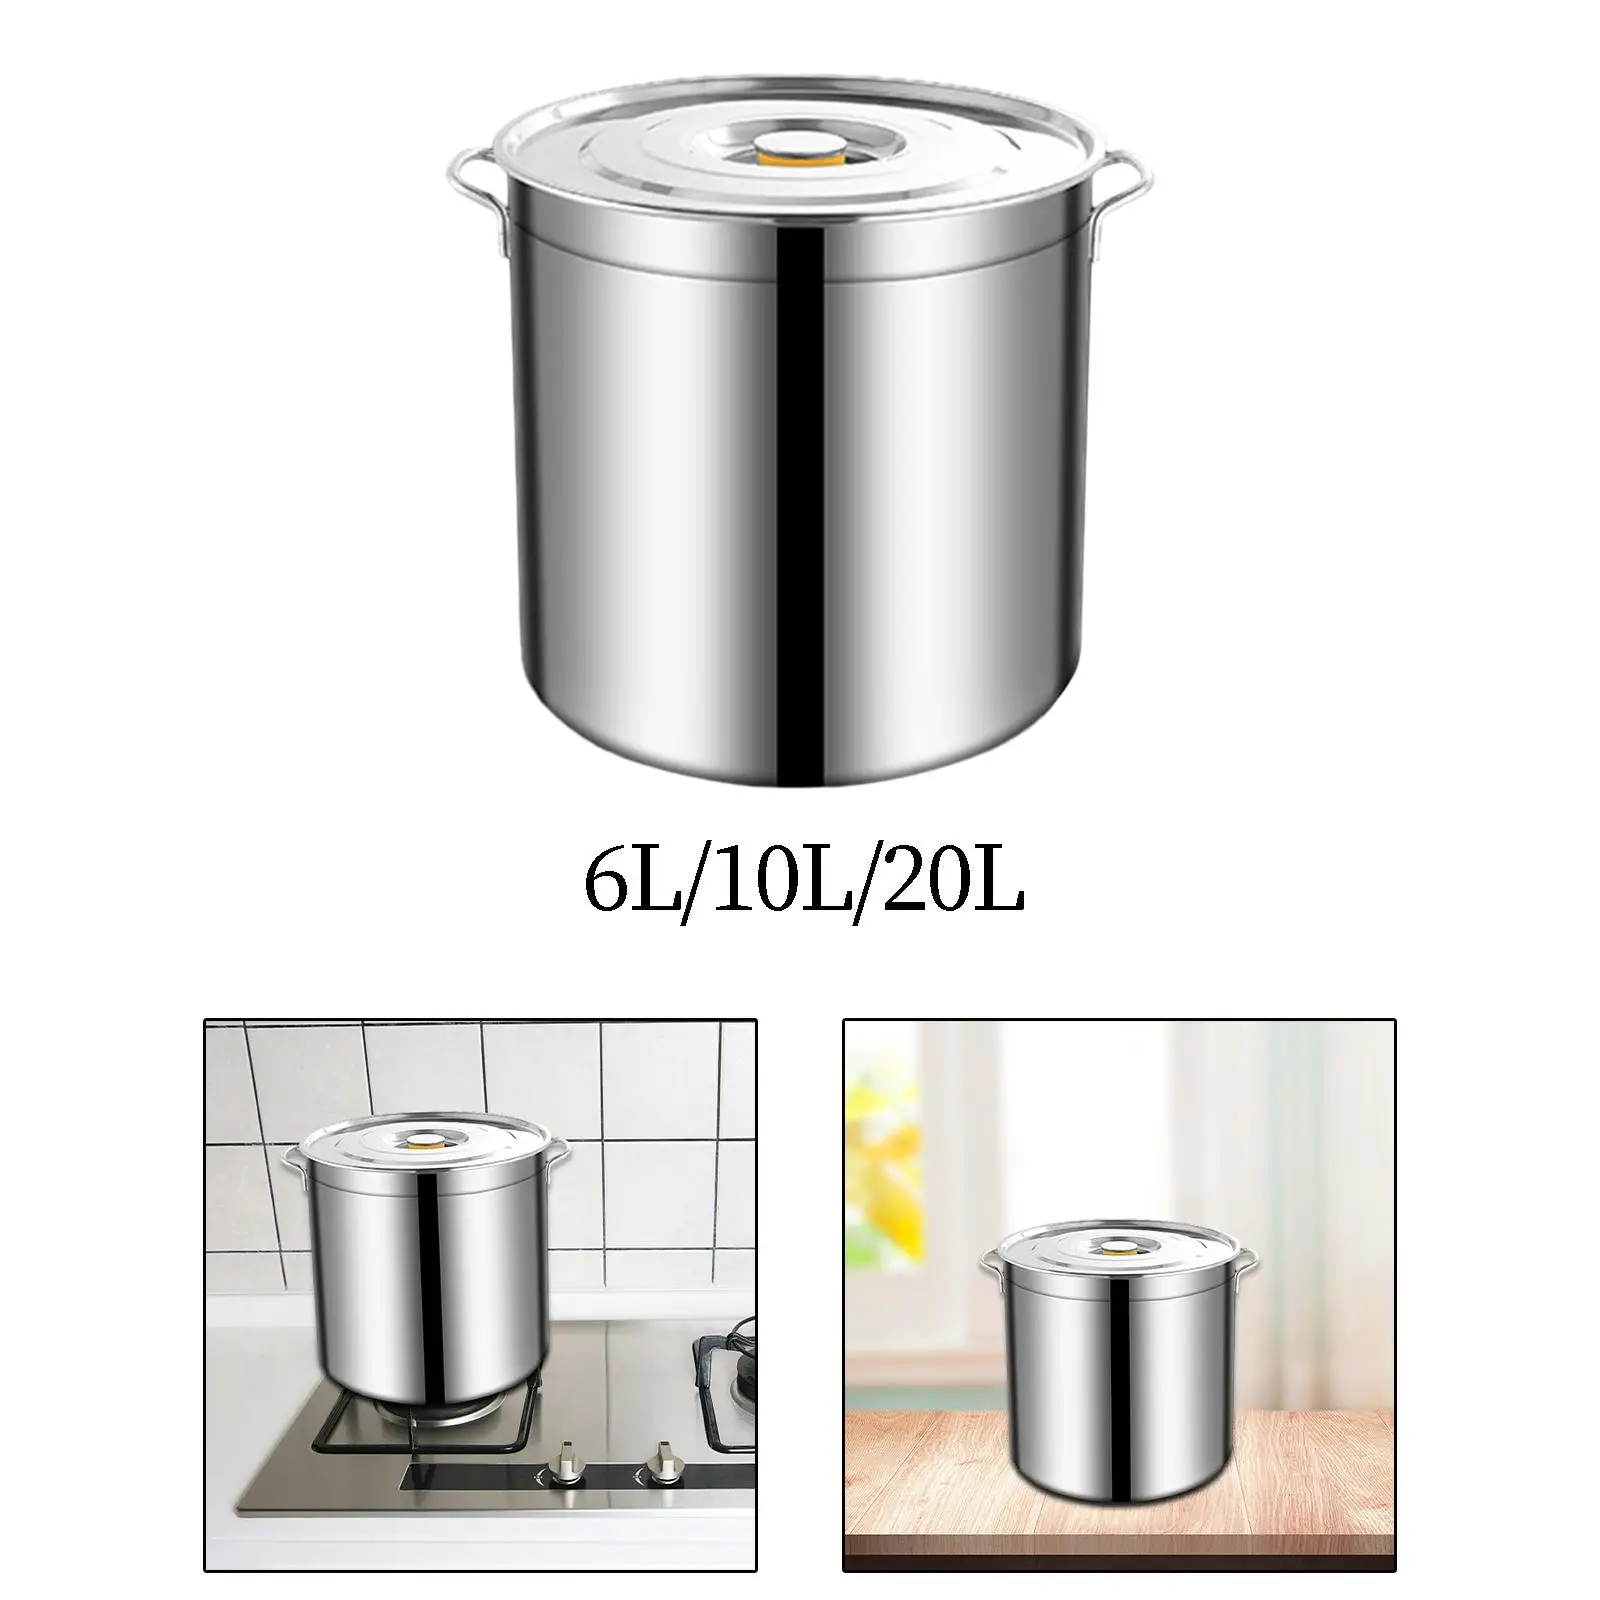 Stainless Steel Stockpot for Boiling Strew Simmer Heavy Duty Big Cookware with Lid Induction Pot for Household Hotel Canteens